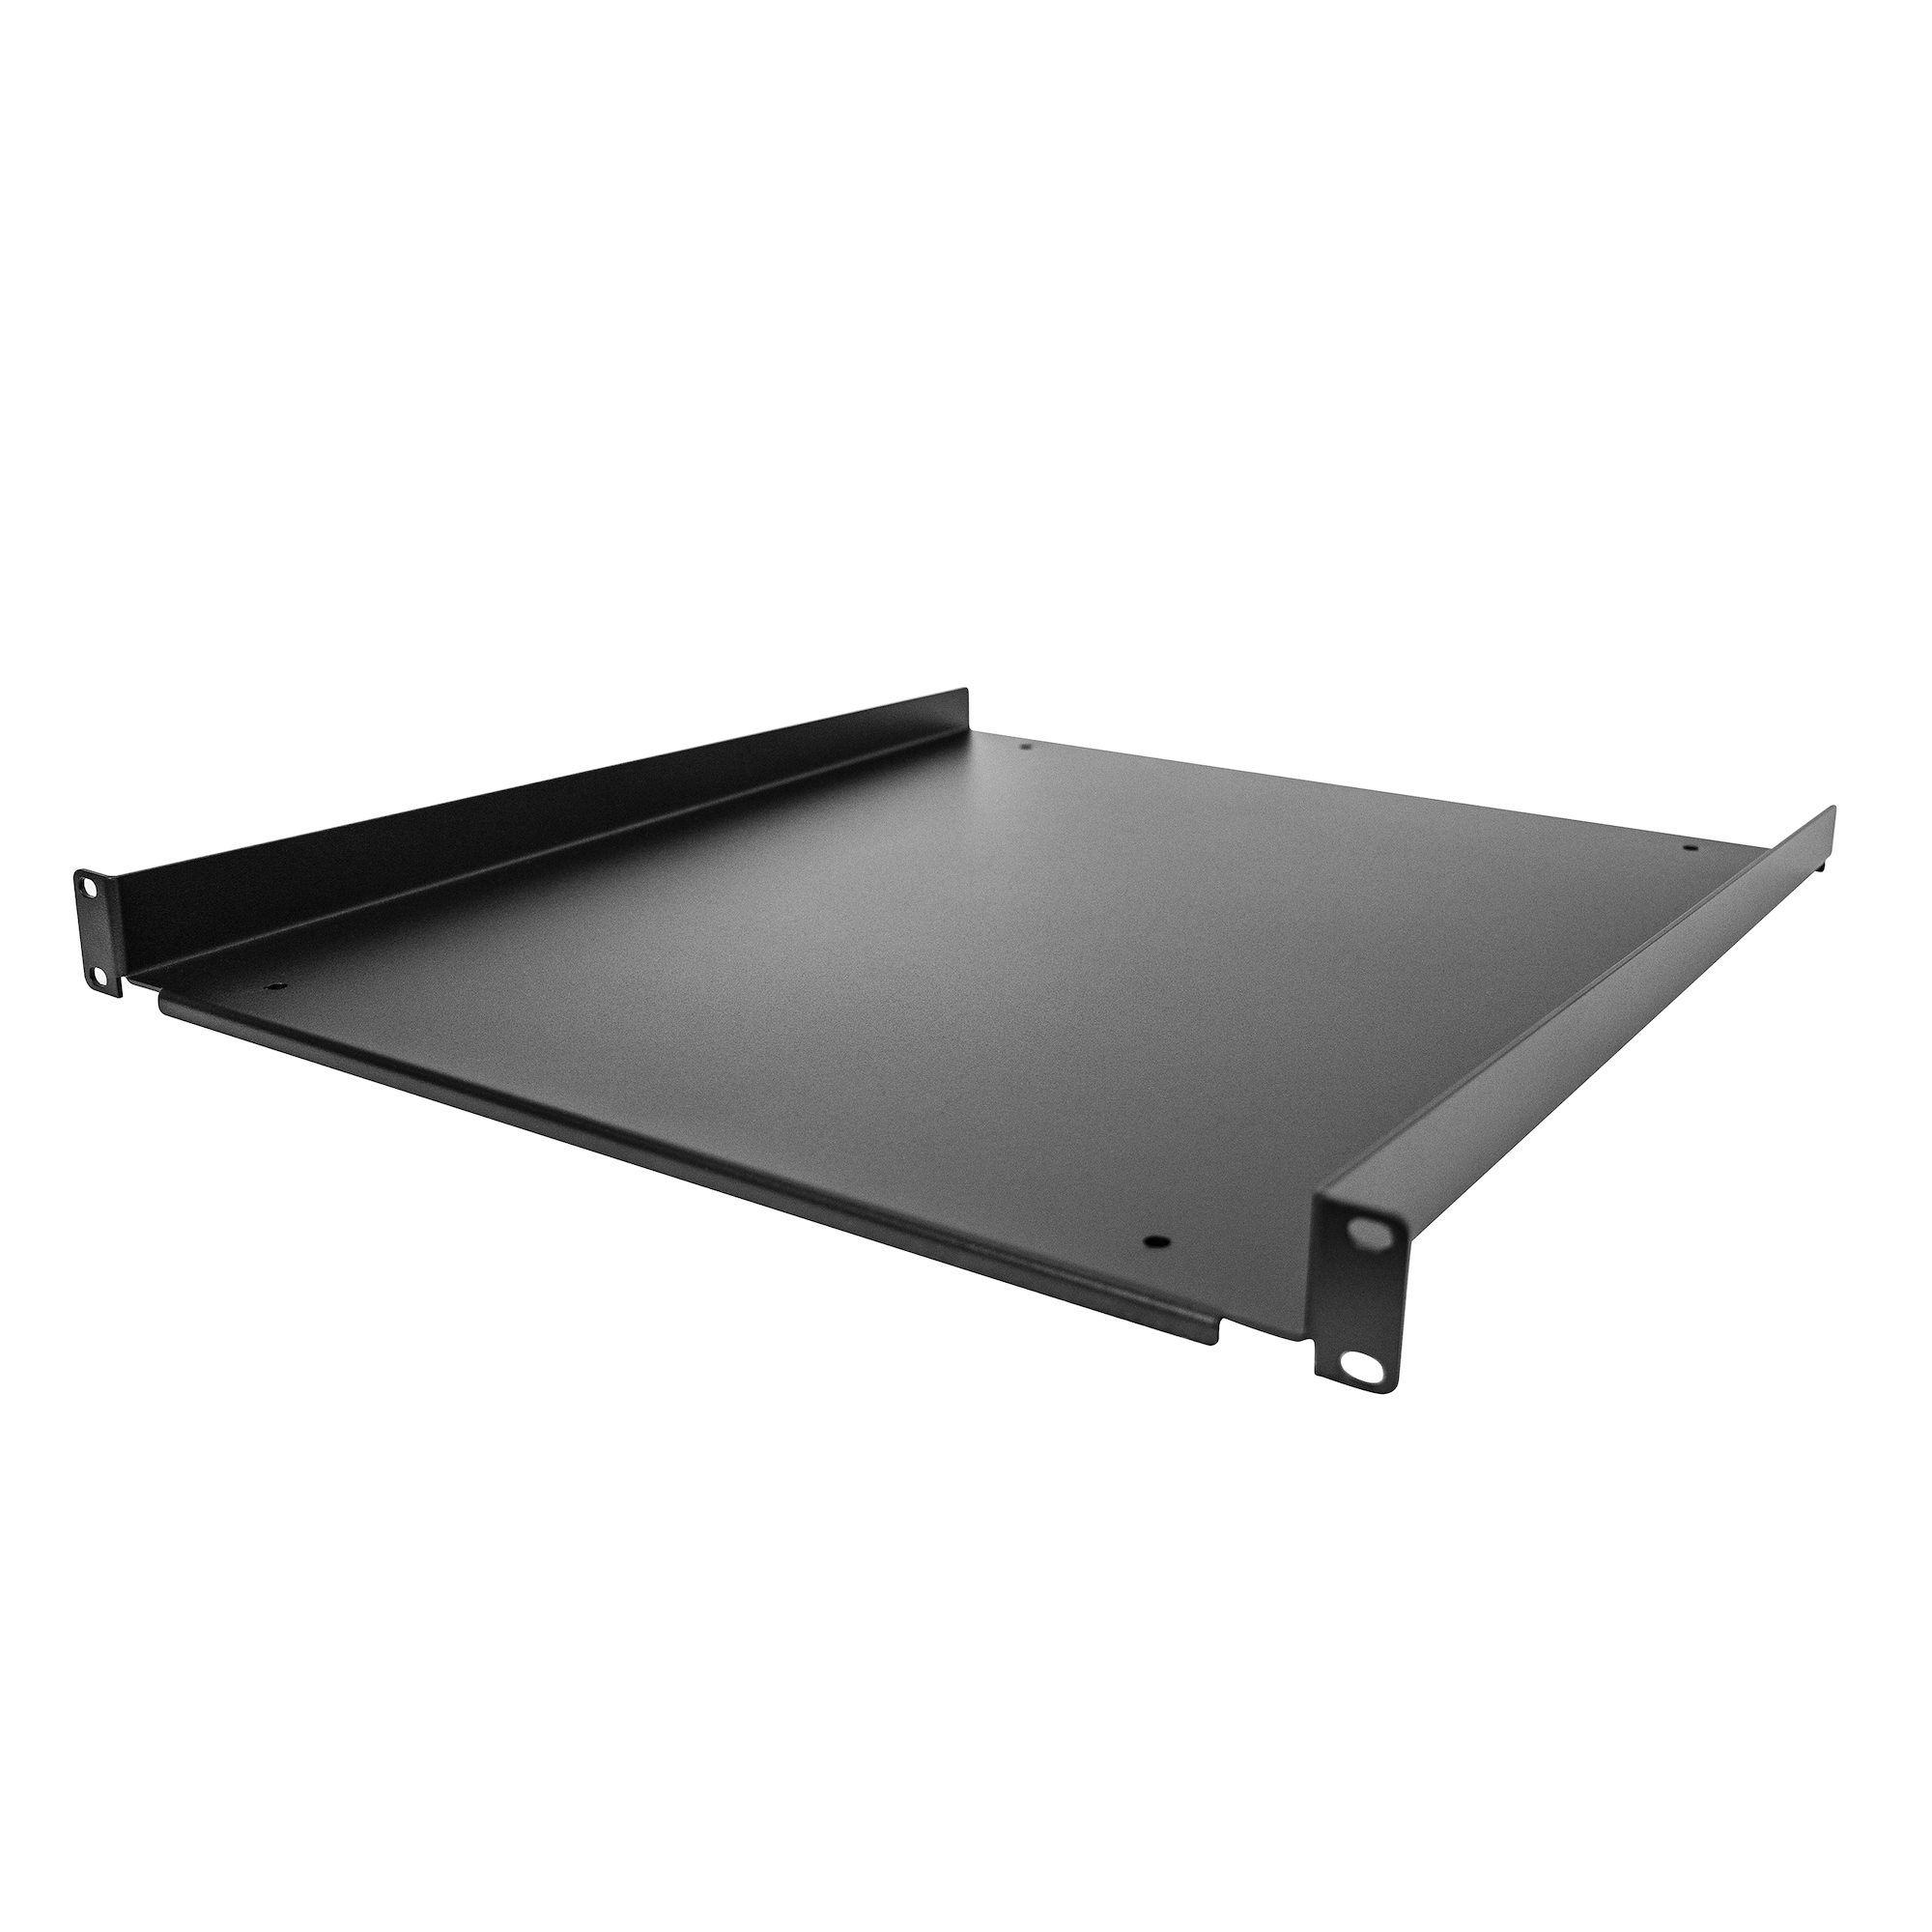 1U Server Rack Shelf Front Mounting Type Steel Vented Rack Shelf Adjustable 10 Deep Easily add a sturdy and convenient Rack Mount For 19 Inch Cabinets and Racks 